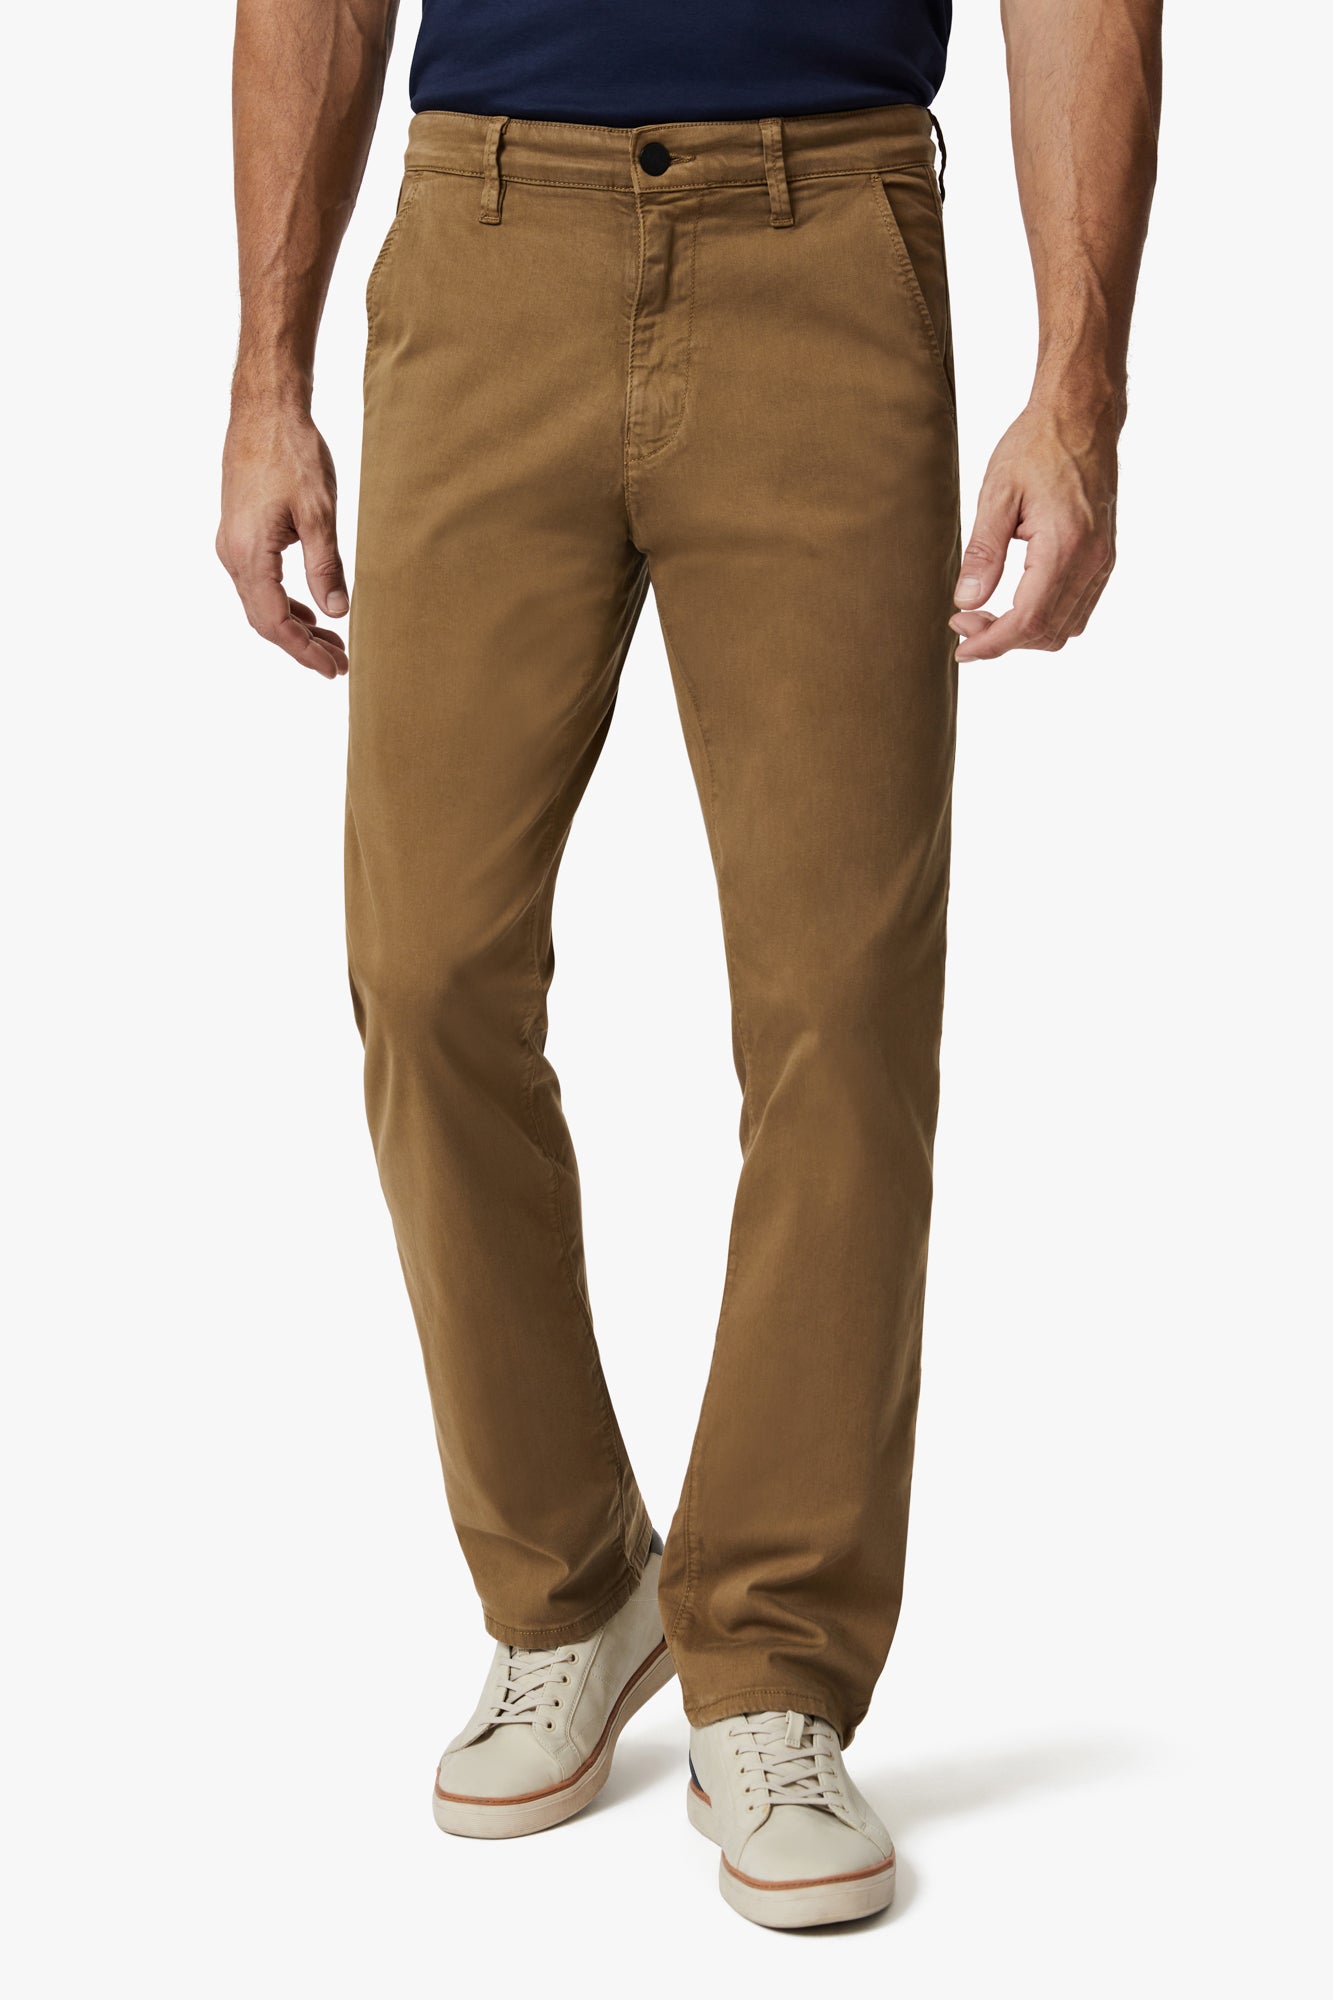 Charisma Relaxed Straight Chino Pants In Tobacco Twill Image 2